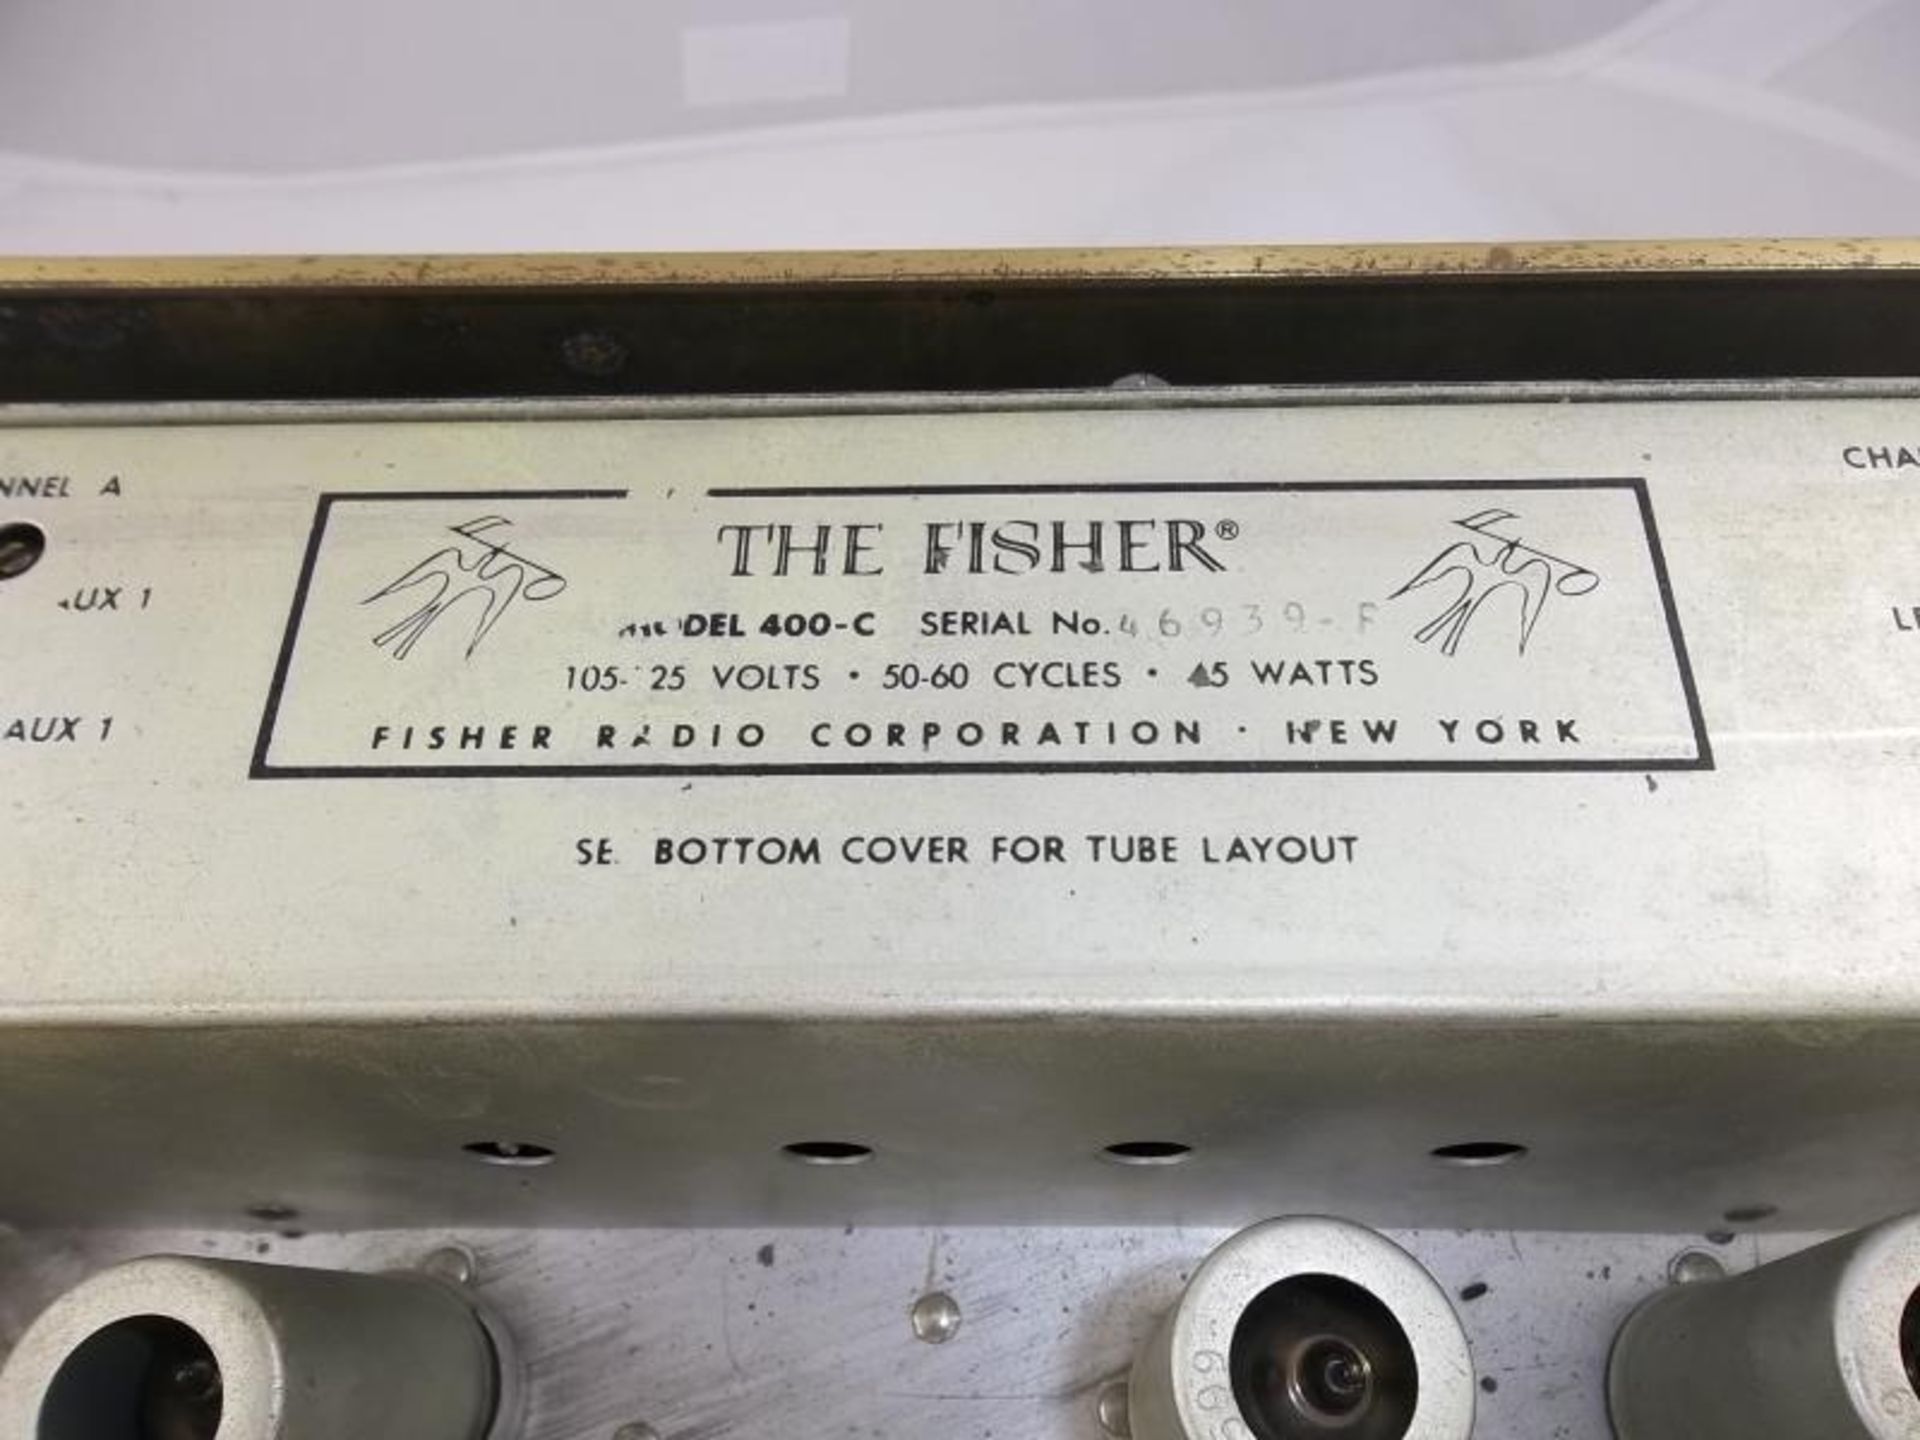 The Fisher model 400-C stereophonic receiver, audio control, no case, s#46939-F - Image 6 of 6